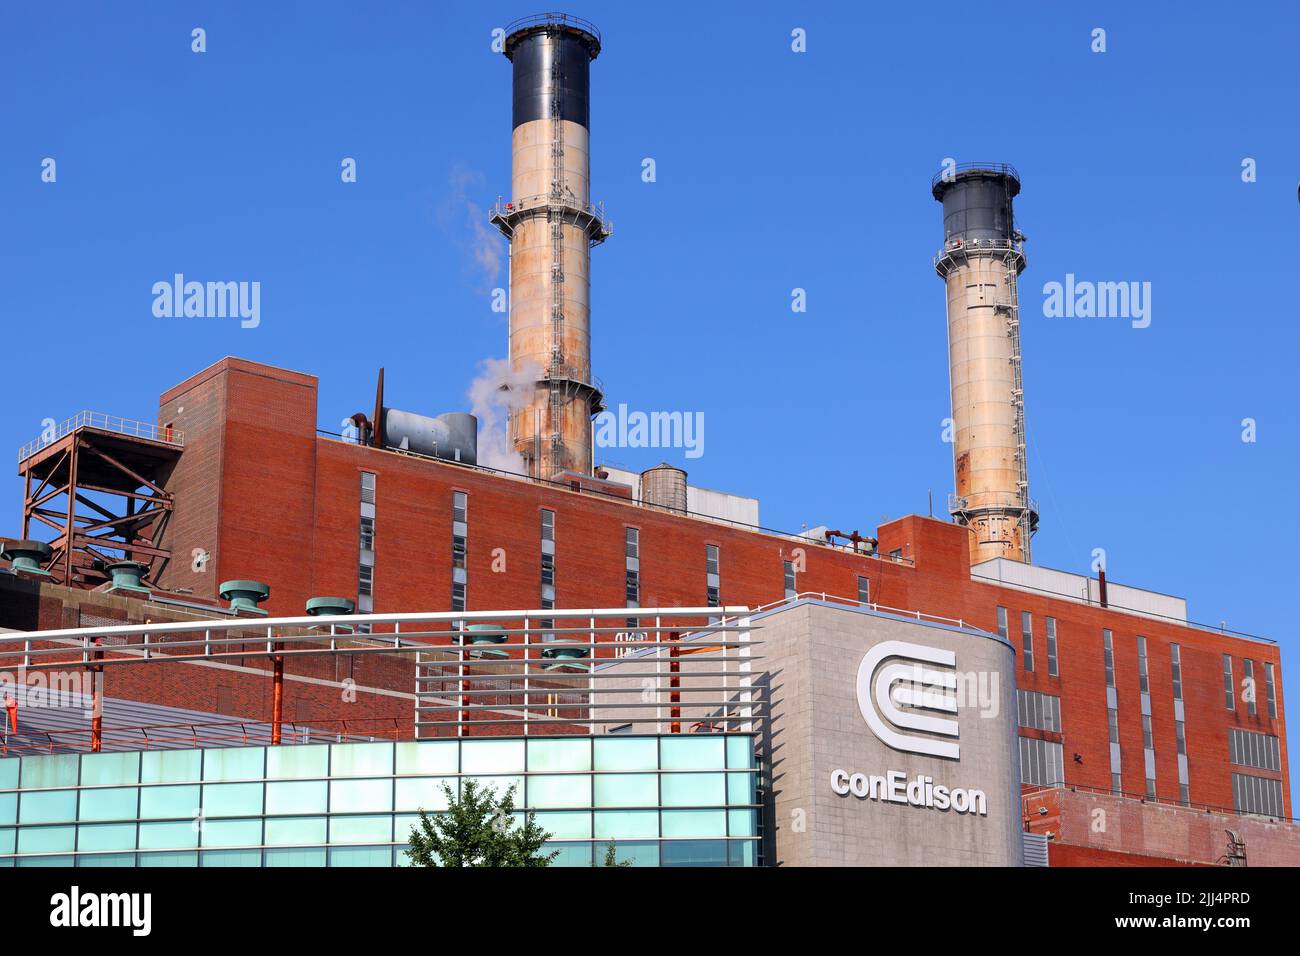 The Con Edison East River Generating Station with two steel stacks set against a sunny sky. Con Ed, Consolidated Edison in Manhattan, New York. Stock Photo